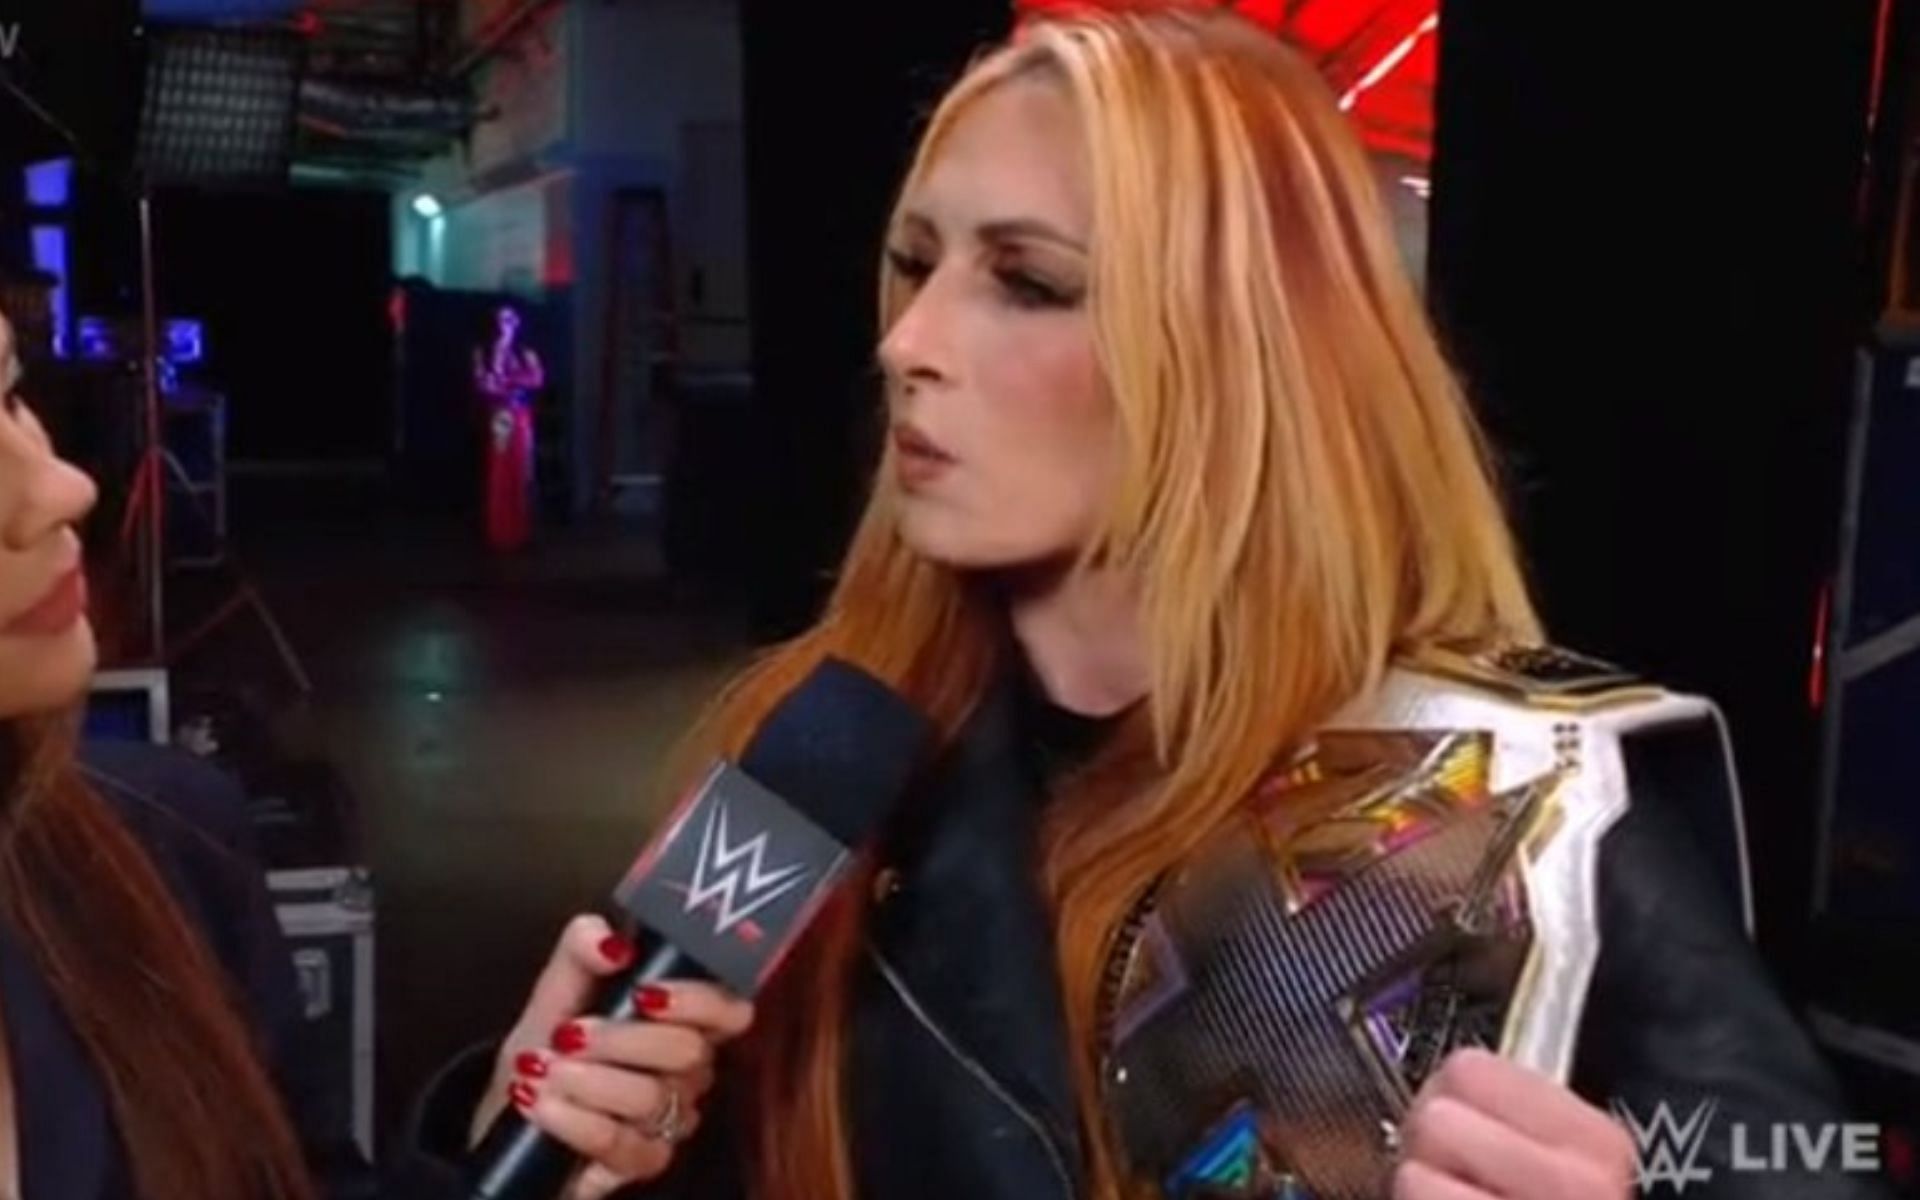 Who was that in the background of this segment?